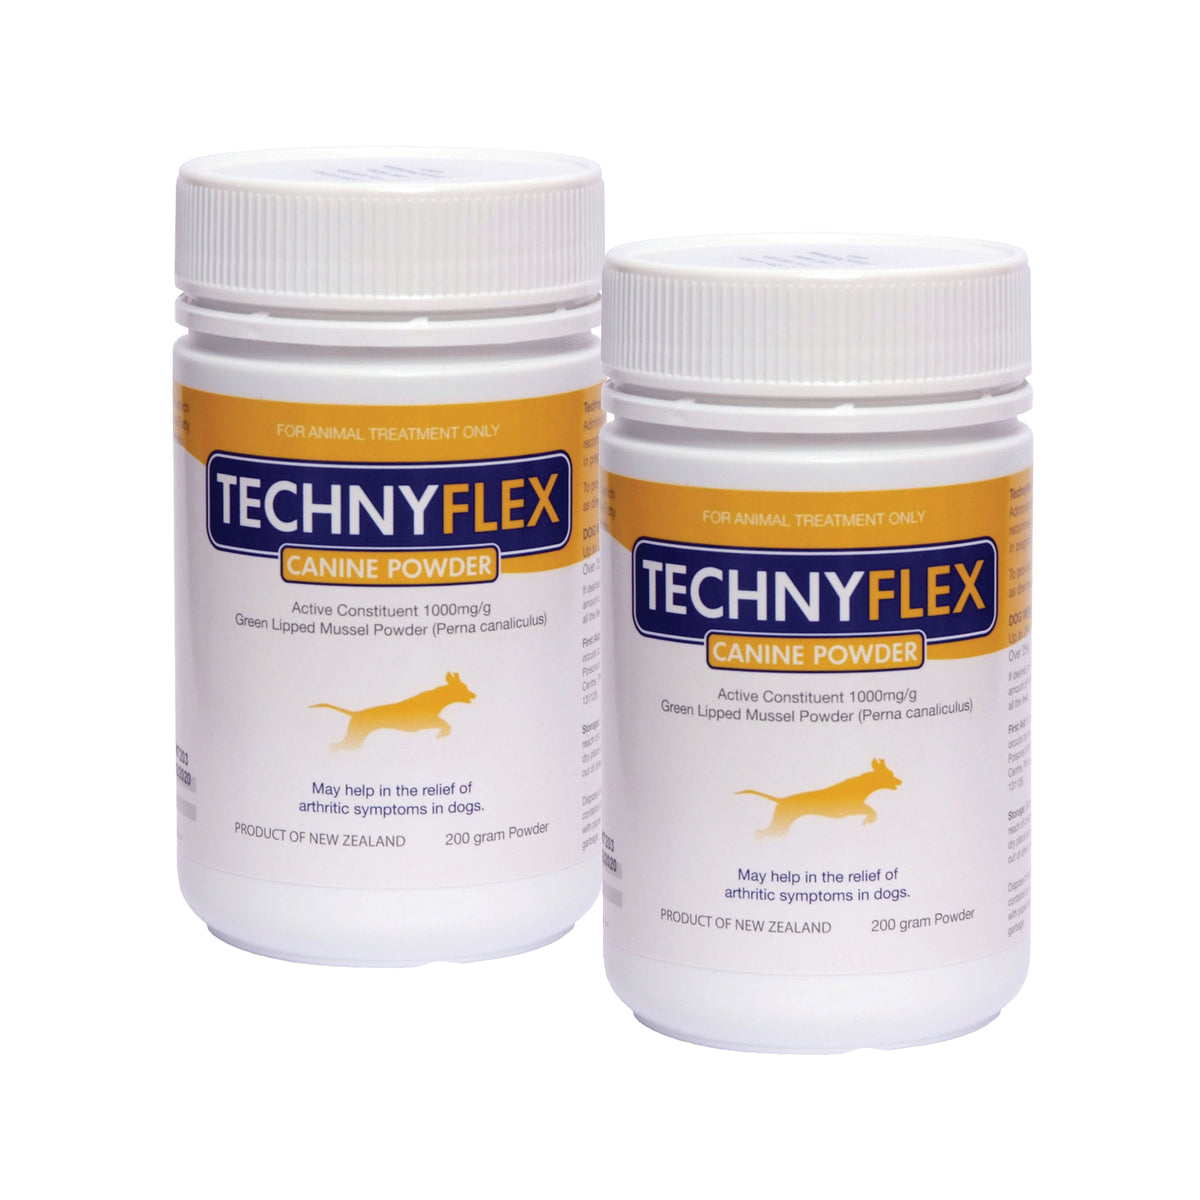 Technyflex Canine Natural Anti-inflammatory Powder for Dogs - Value Bundle